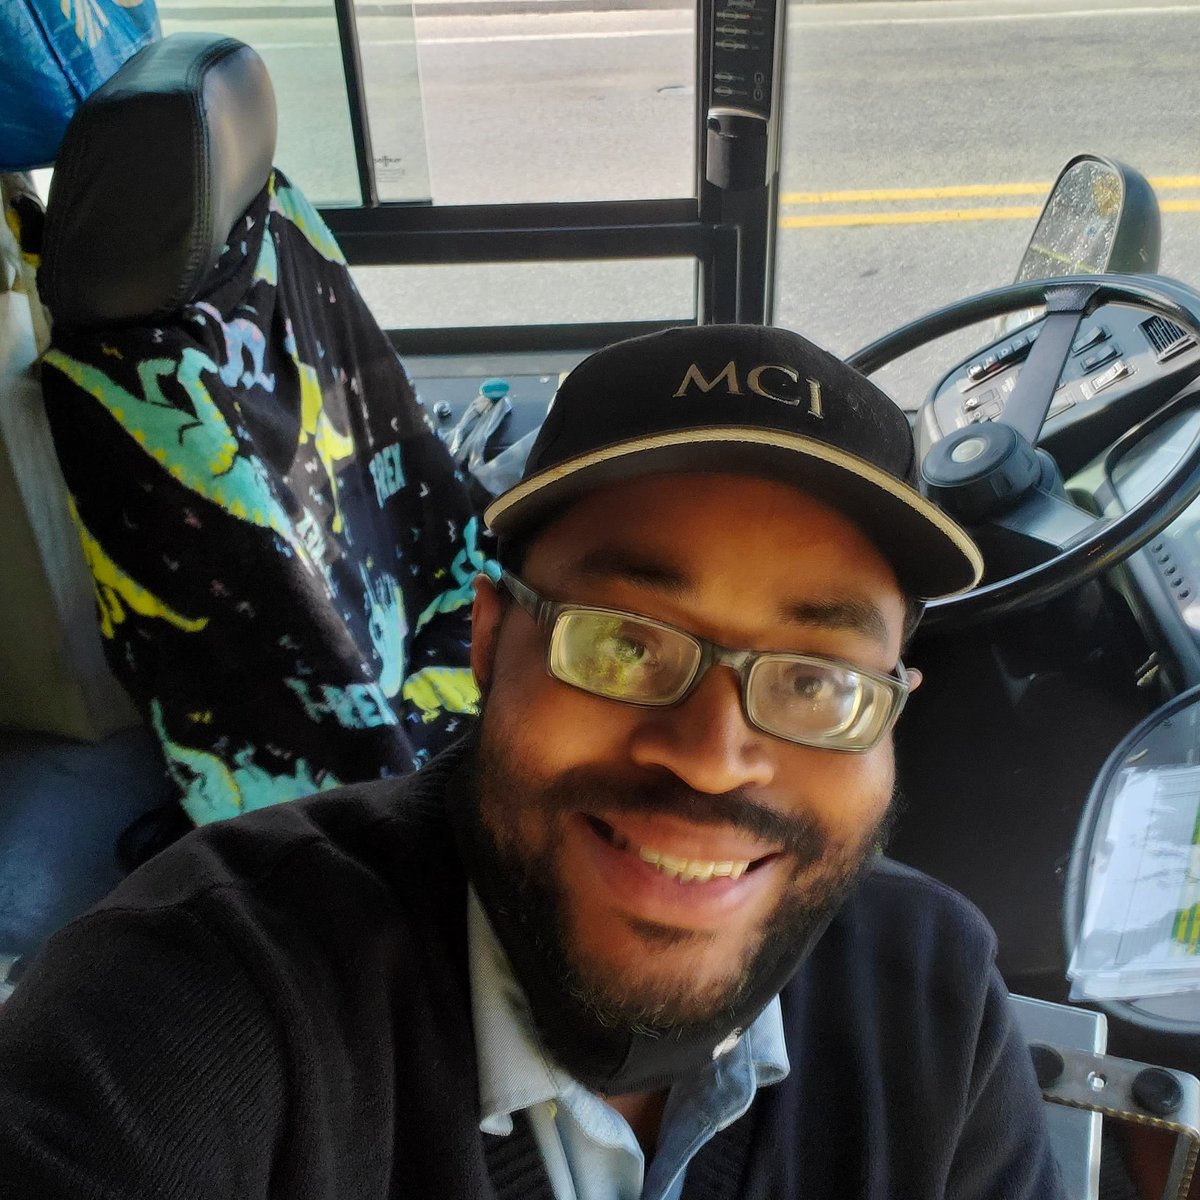 It's National Transit Workers Appreciation Day! Thousands of us across the country are on the job 24/7/365 helping you connect with people & safely get to places!

I'm Marcus from #Philly & I'm proud to be at your service! #TransitDriverAppreciationDay